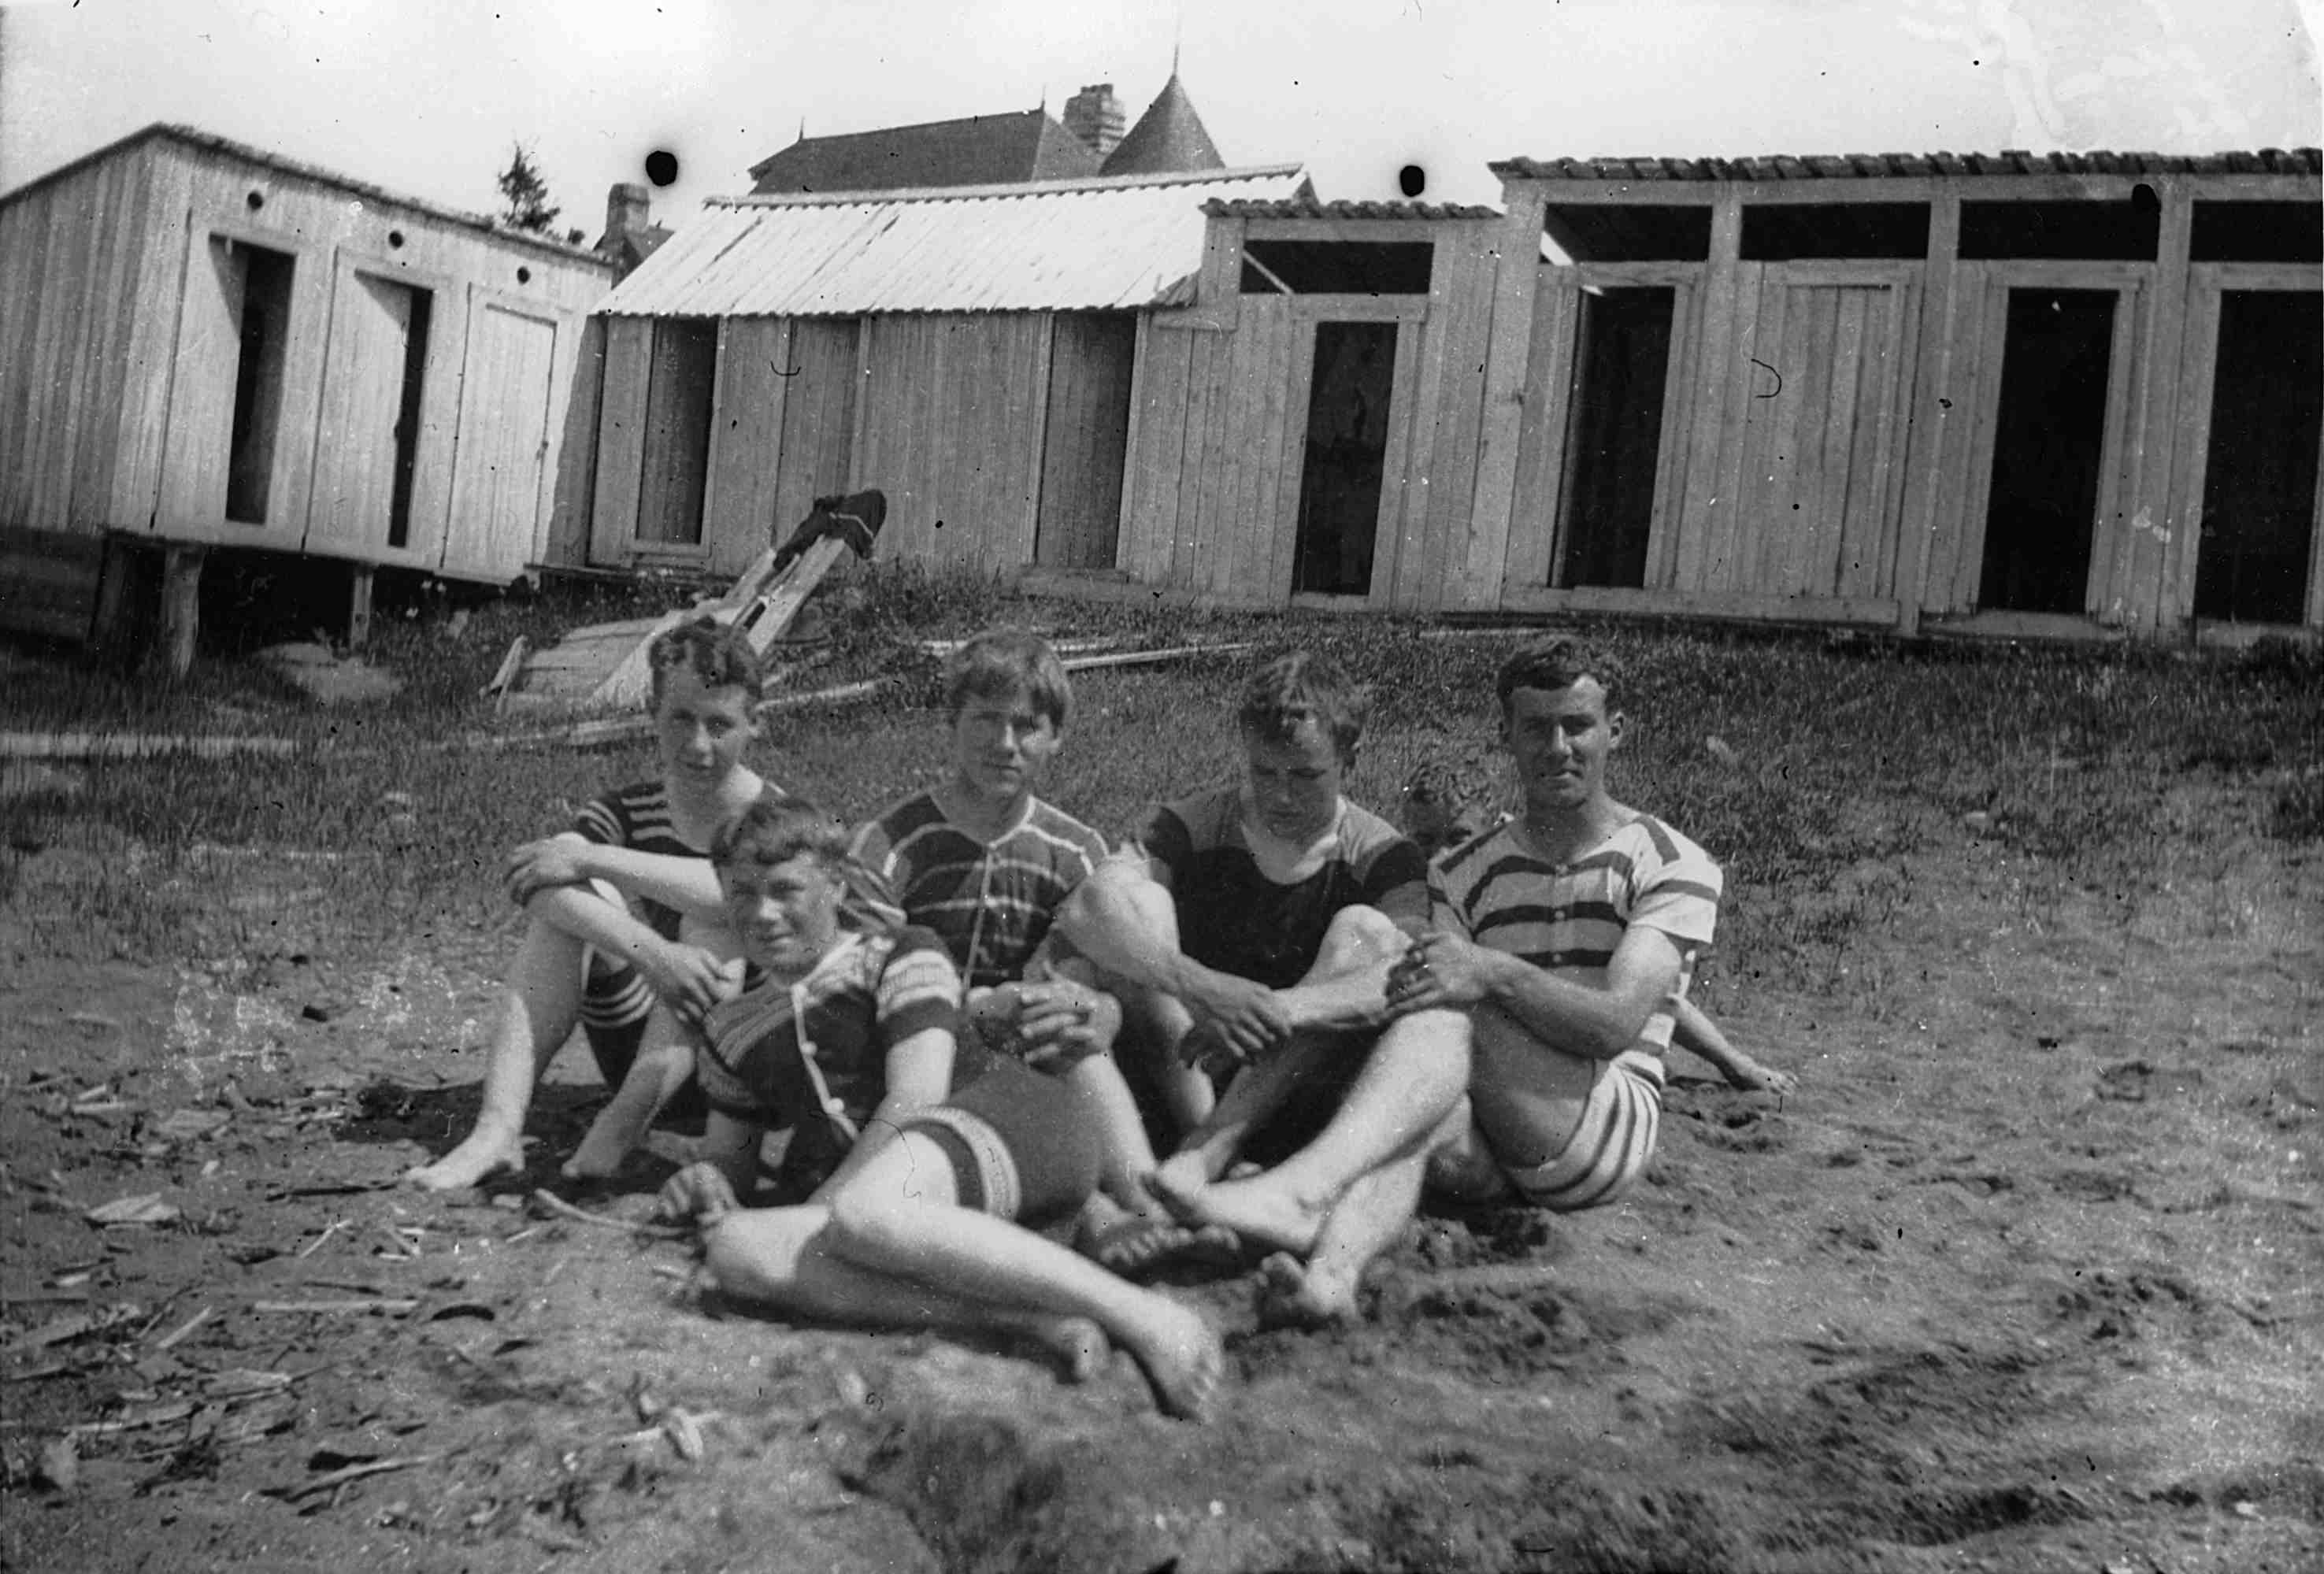 Five adolescents wearing old-fashioned bathing suits and sitting in the sand near a row of bathing cabins.